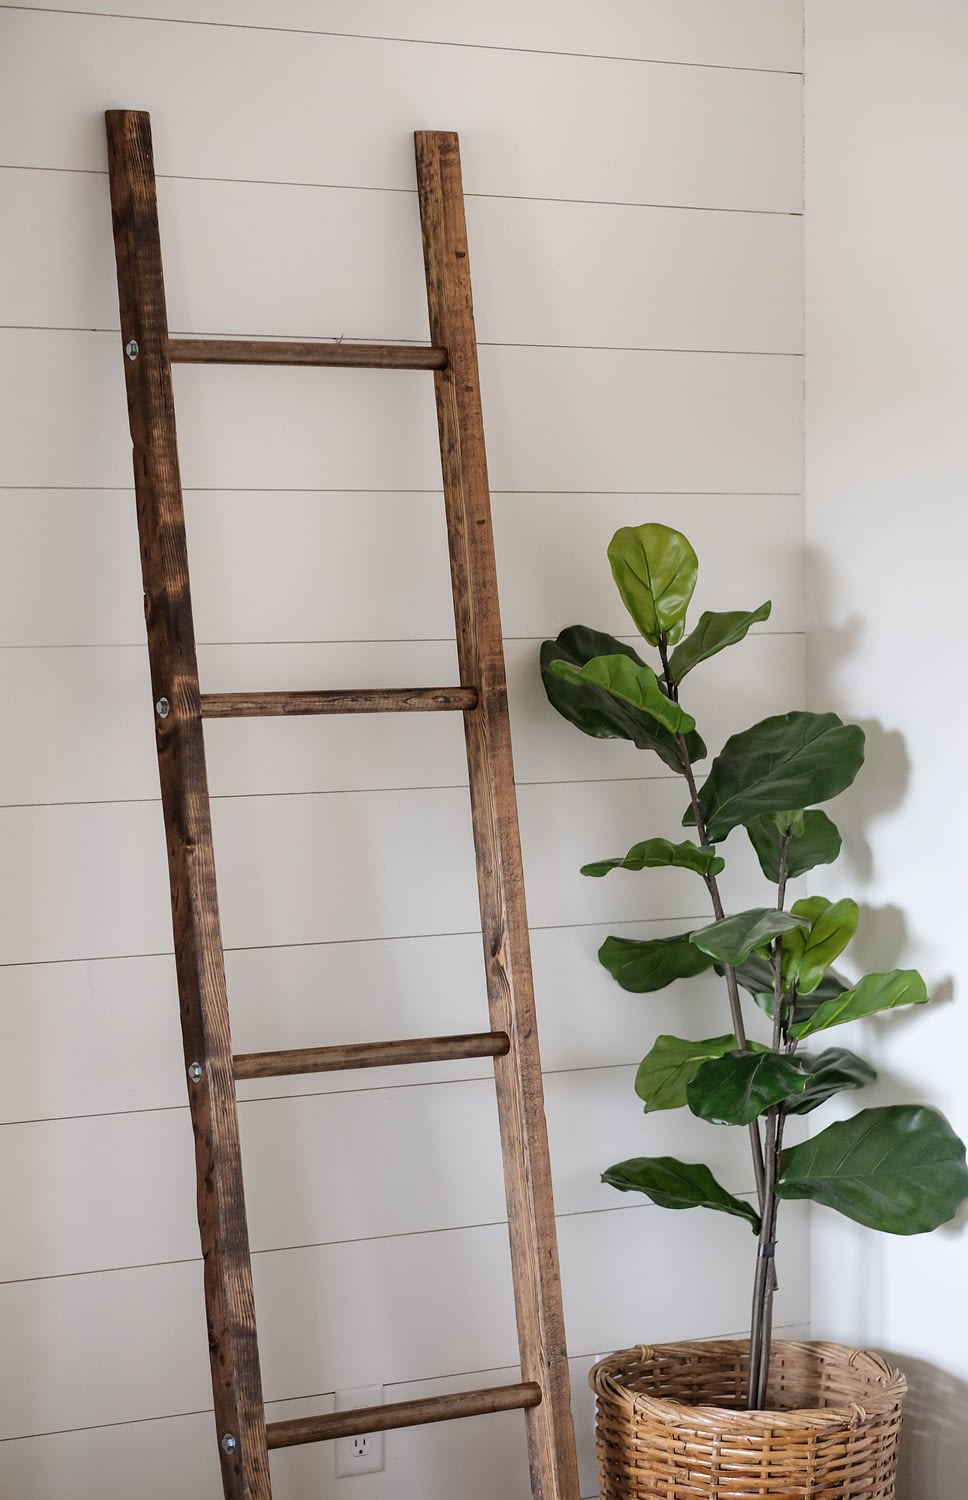 A walnut stained blanket ladder leaning against a white shiplap wall.